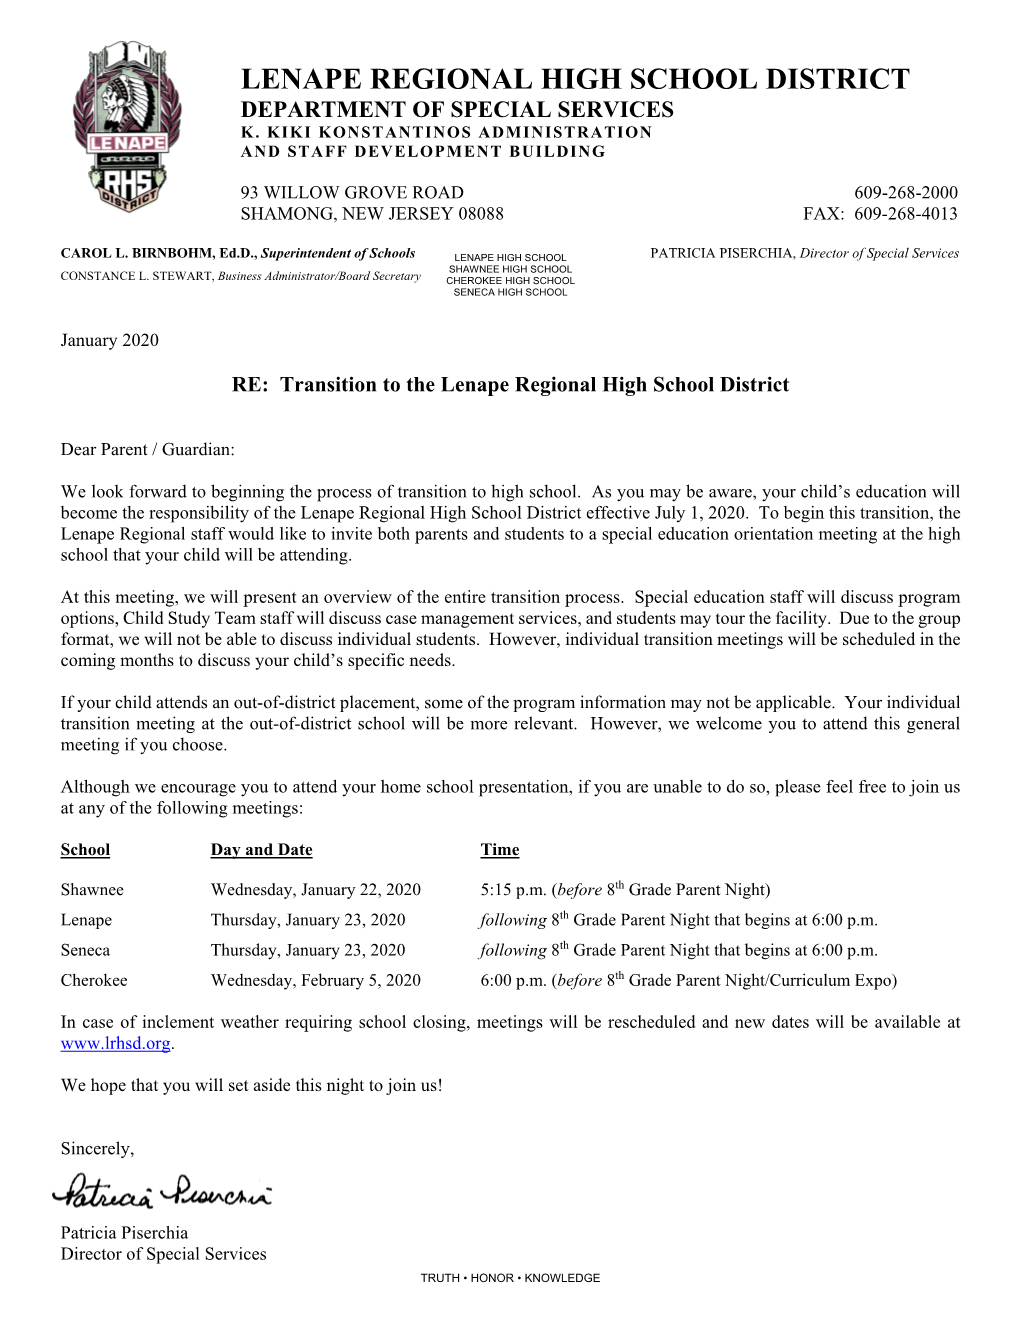 Transition to the LRSD